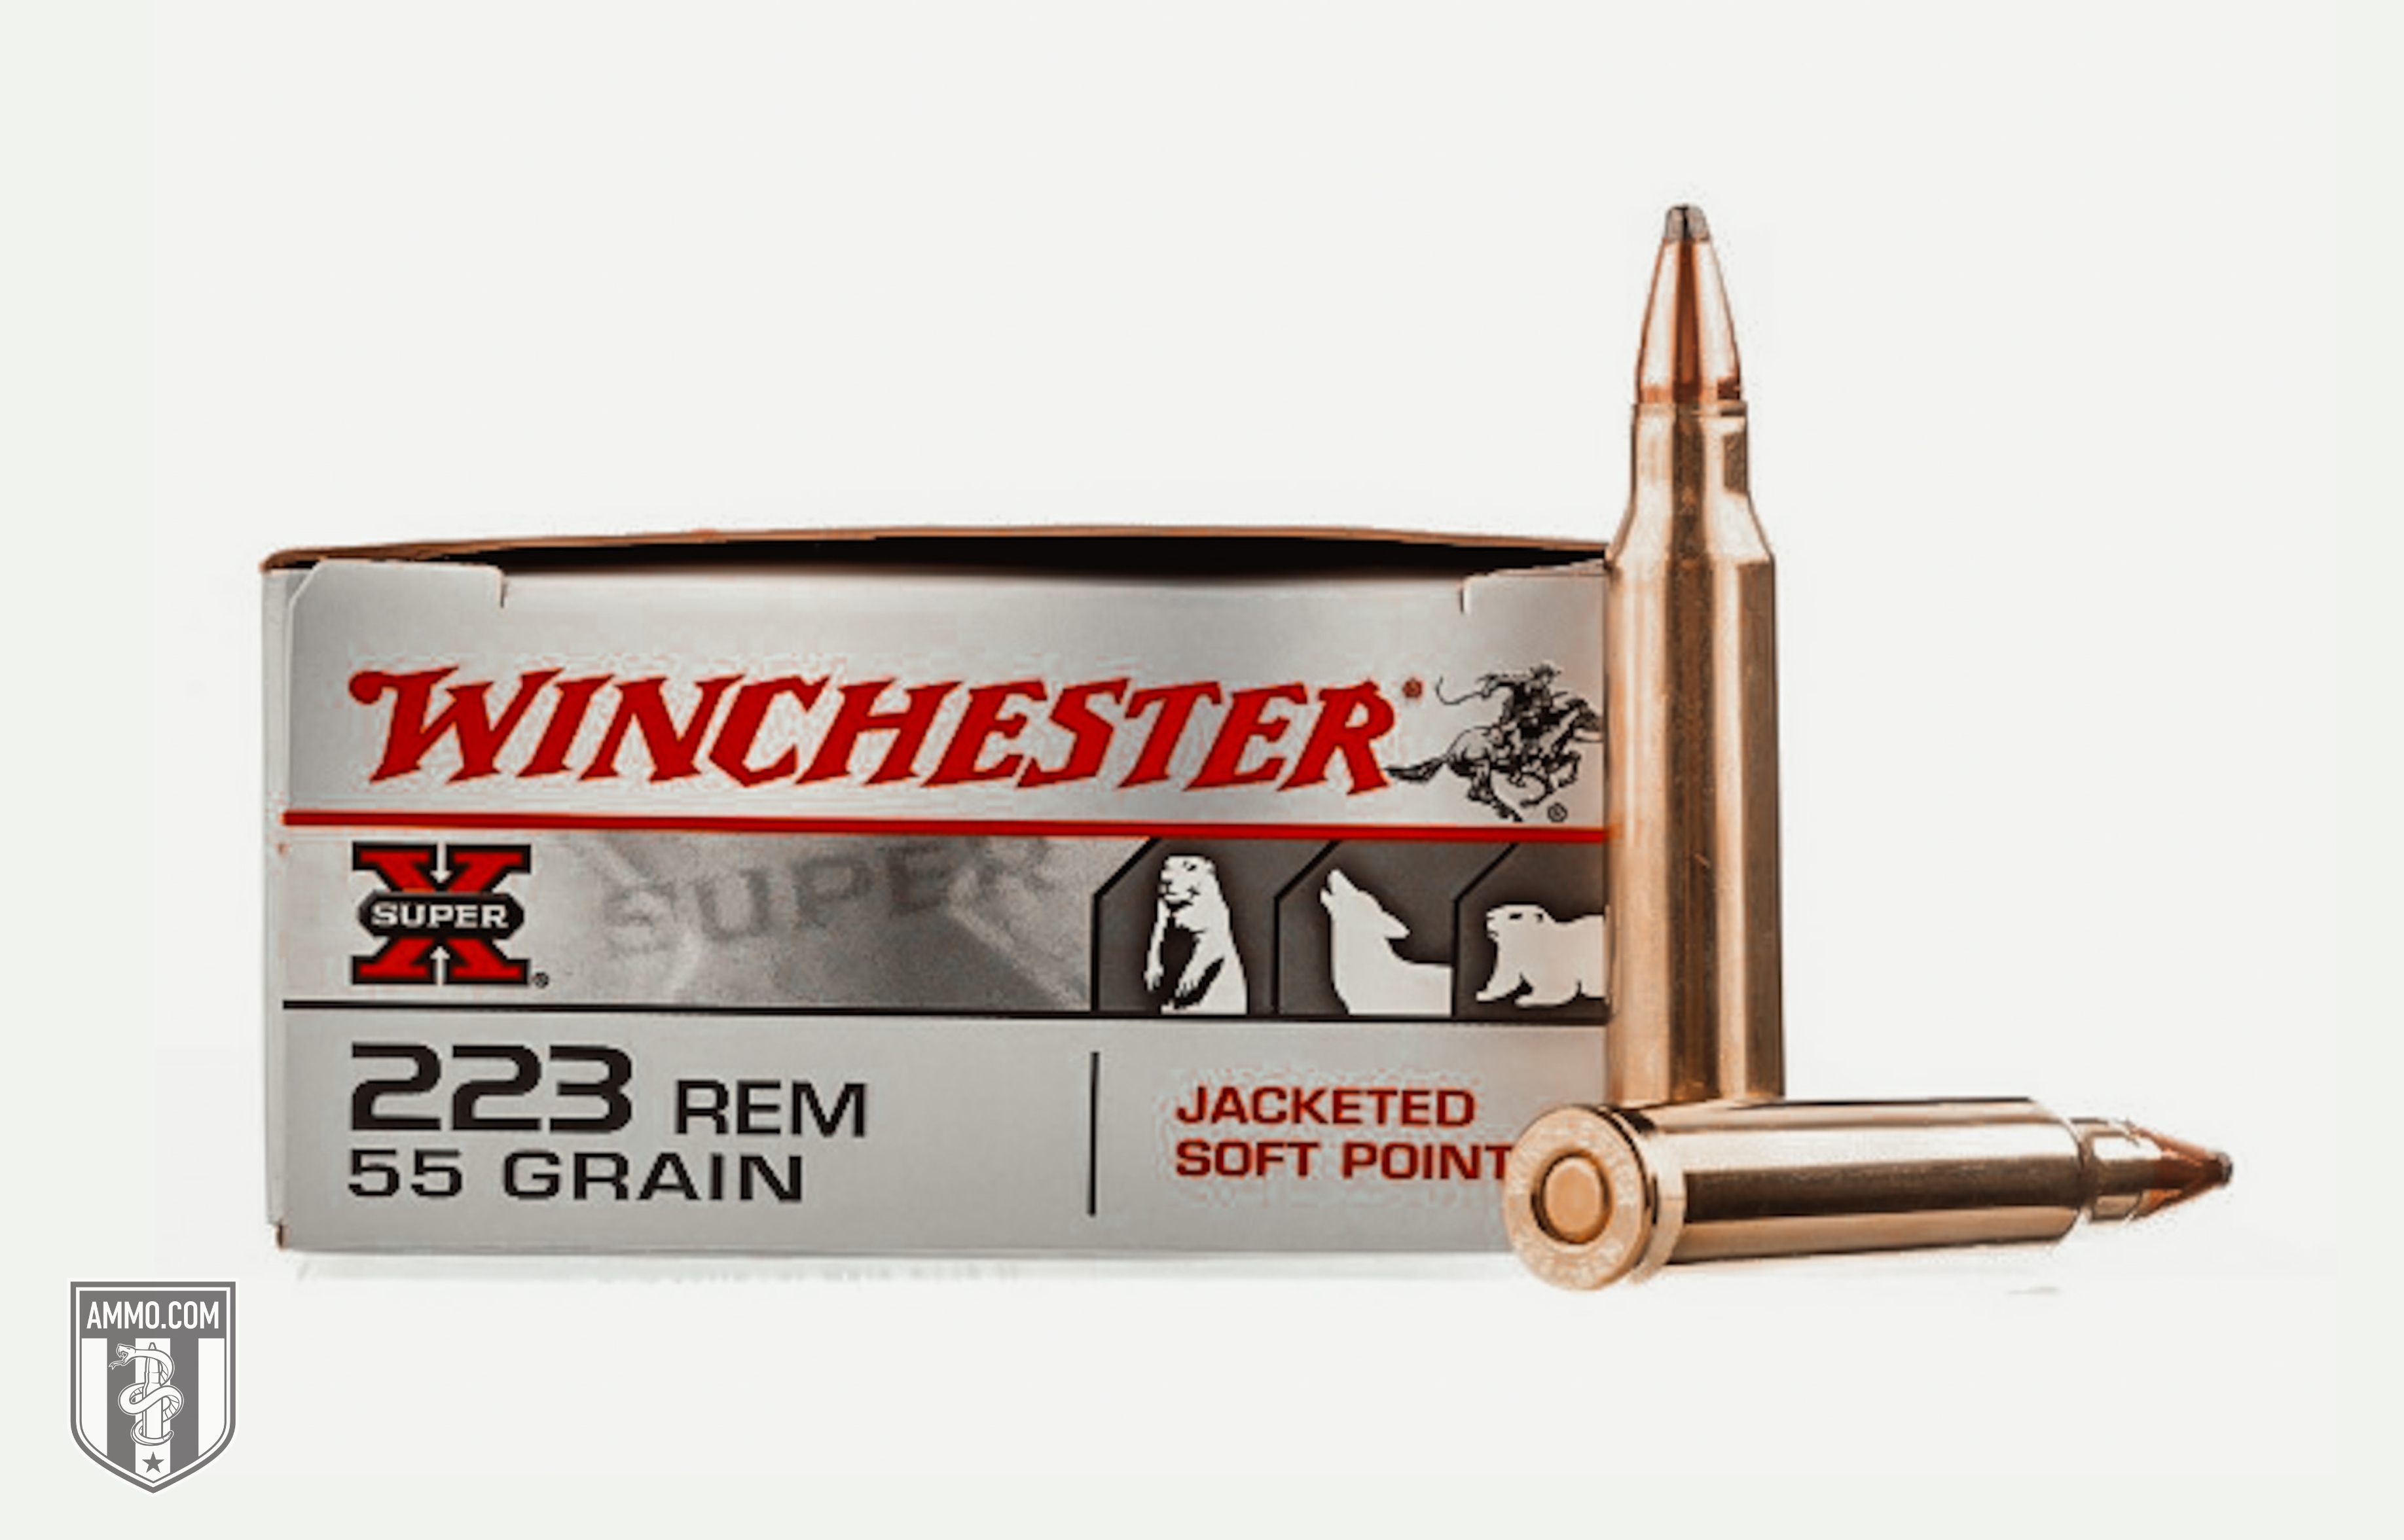 Winchester Super-X 223 Rem ammo for sale